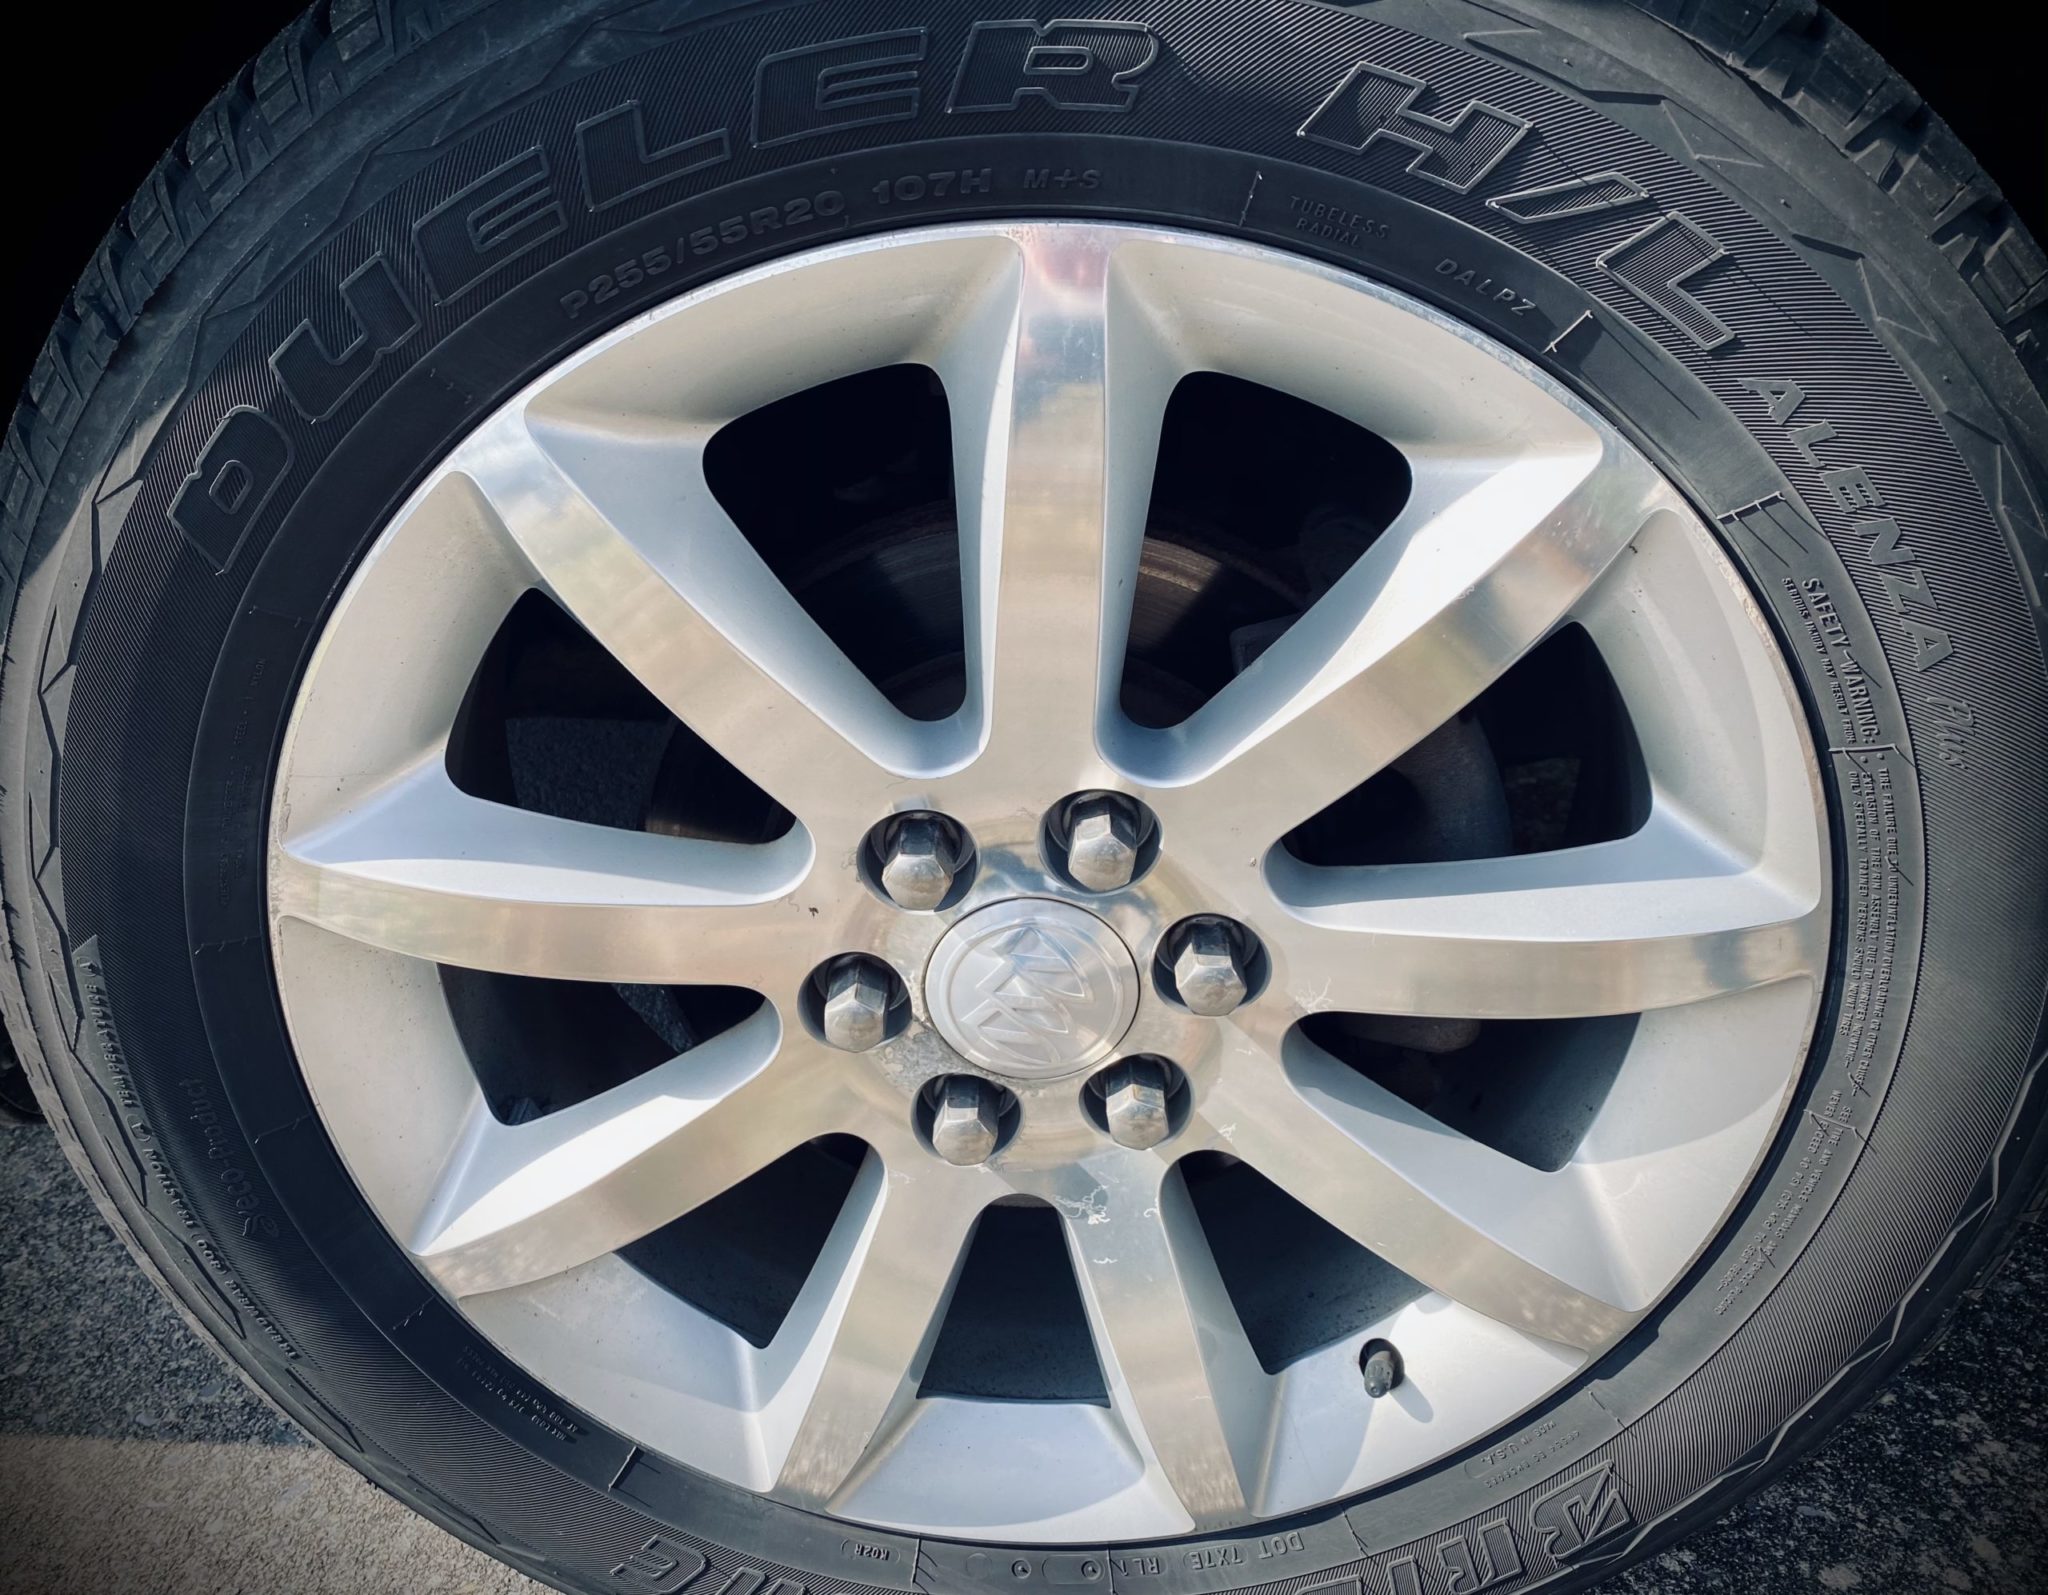 Why GM Discourages Reconditioned Wheels and Why That’s Crucial for Your Buick